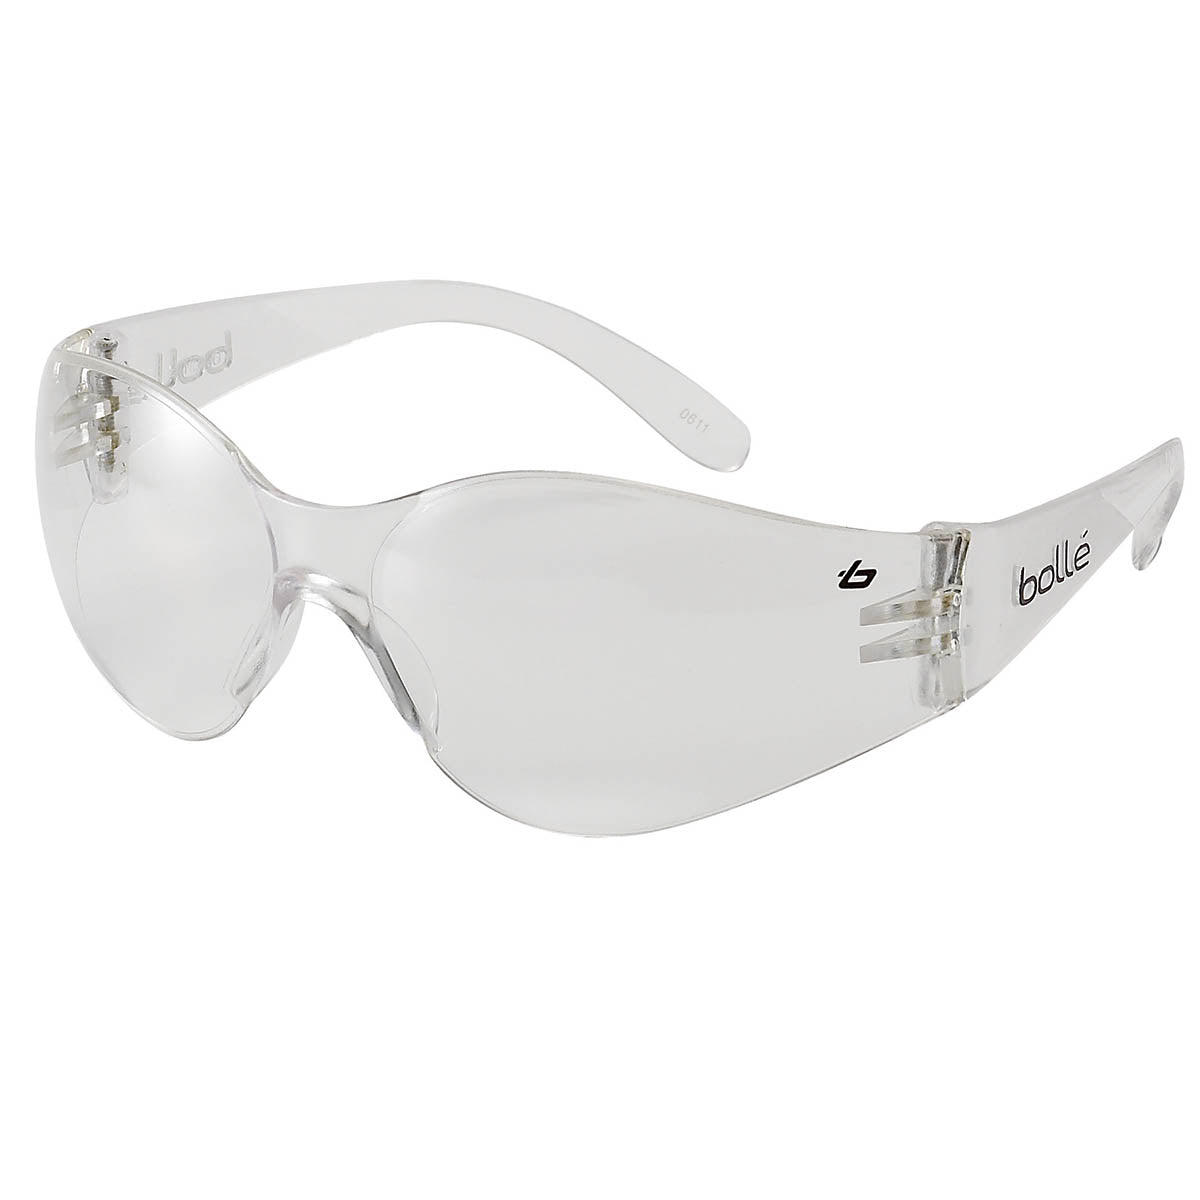 Bolle BANDIDO Safety Glasses Clear Lens - BANCI